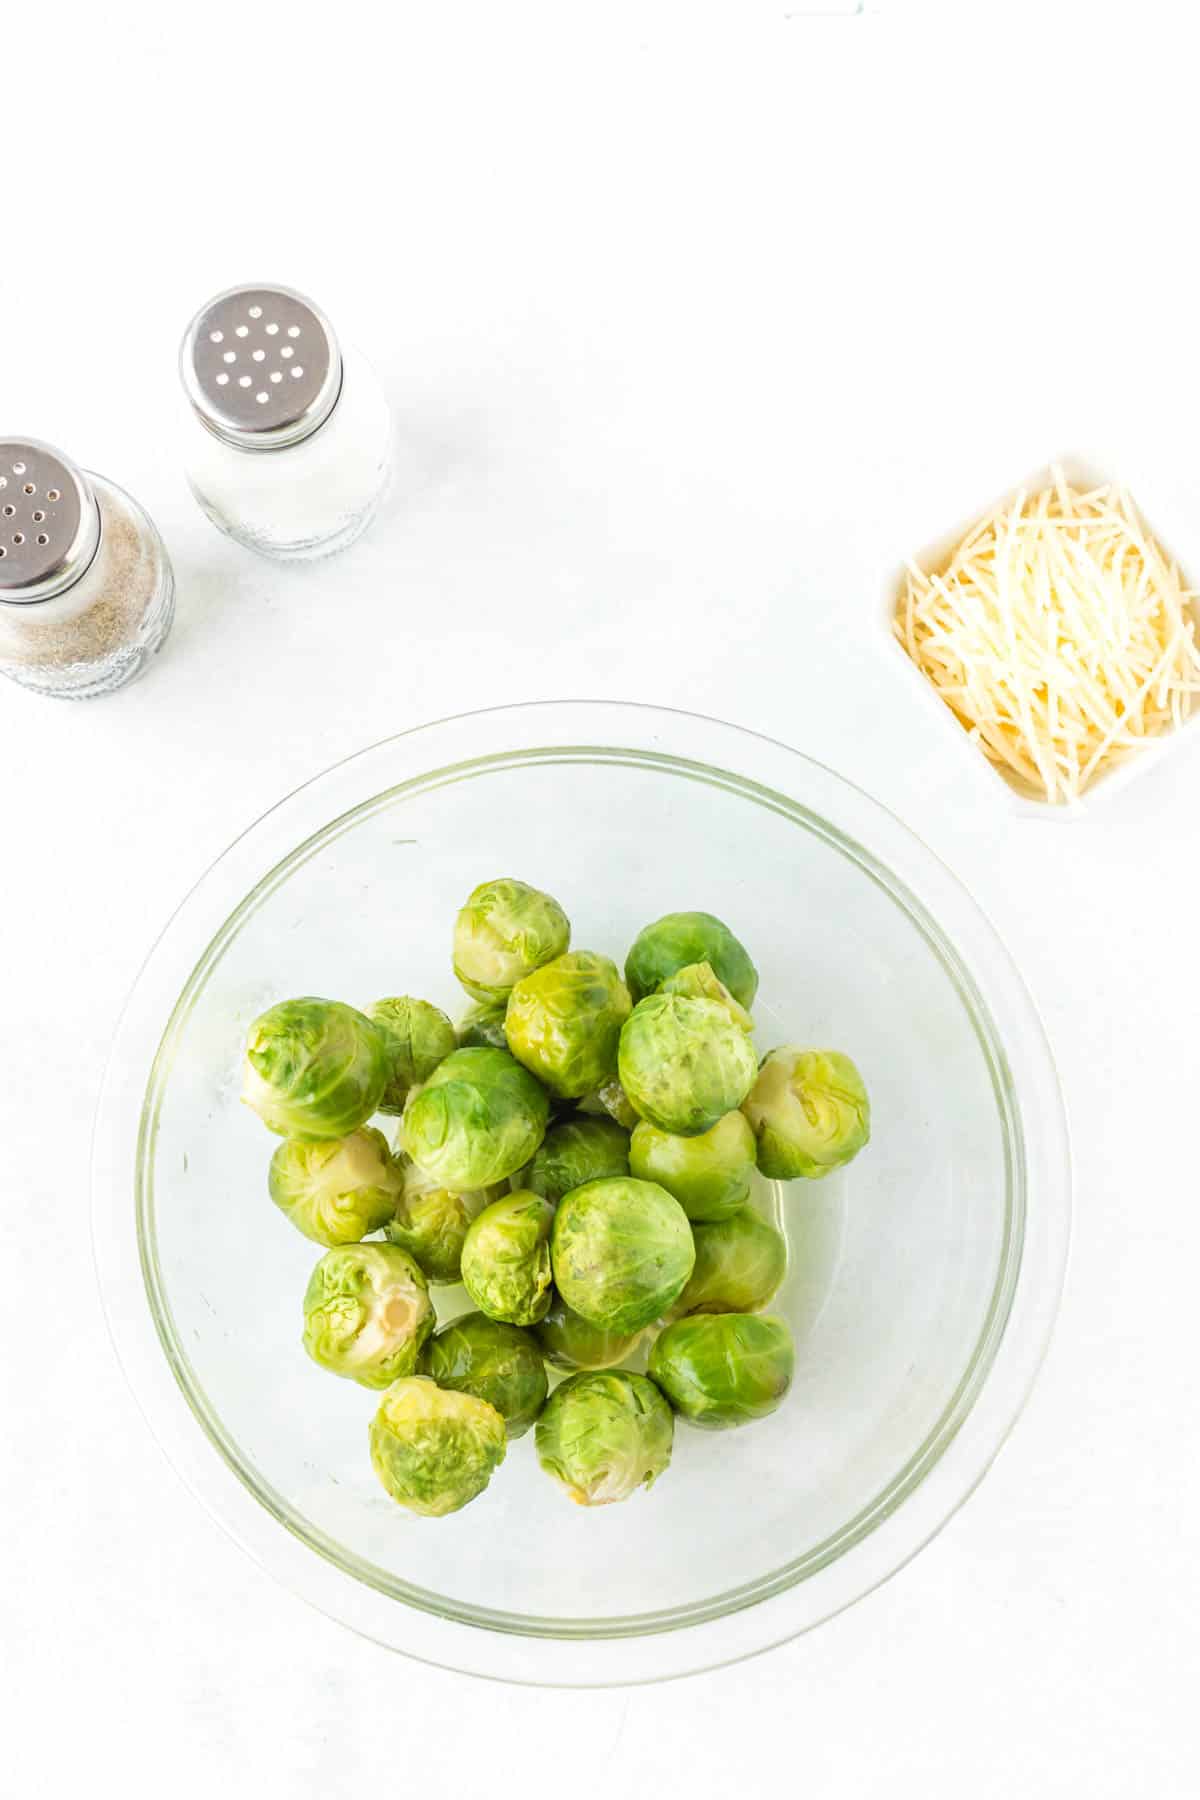 Steamed brussels sprouts in a glass bowl with salt, pepper and grated Parmesan cheese on the side.